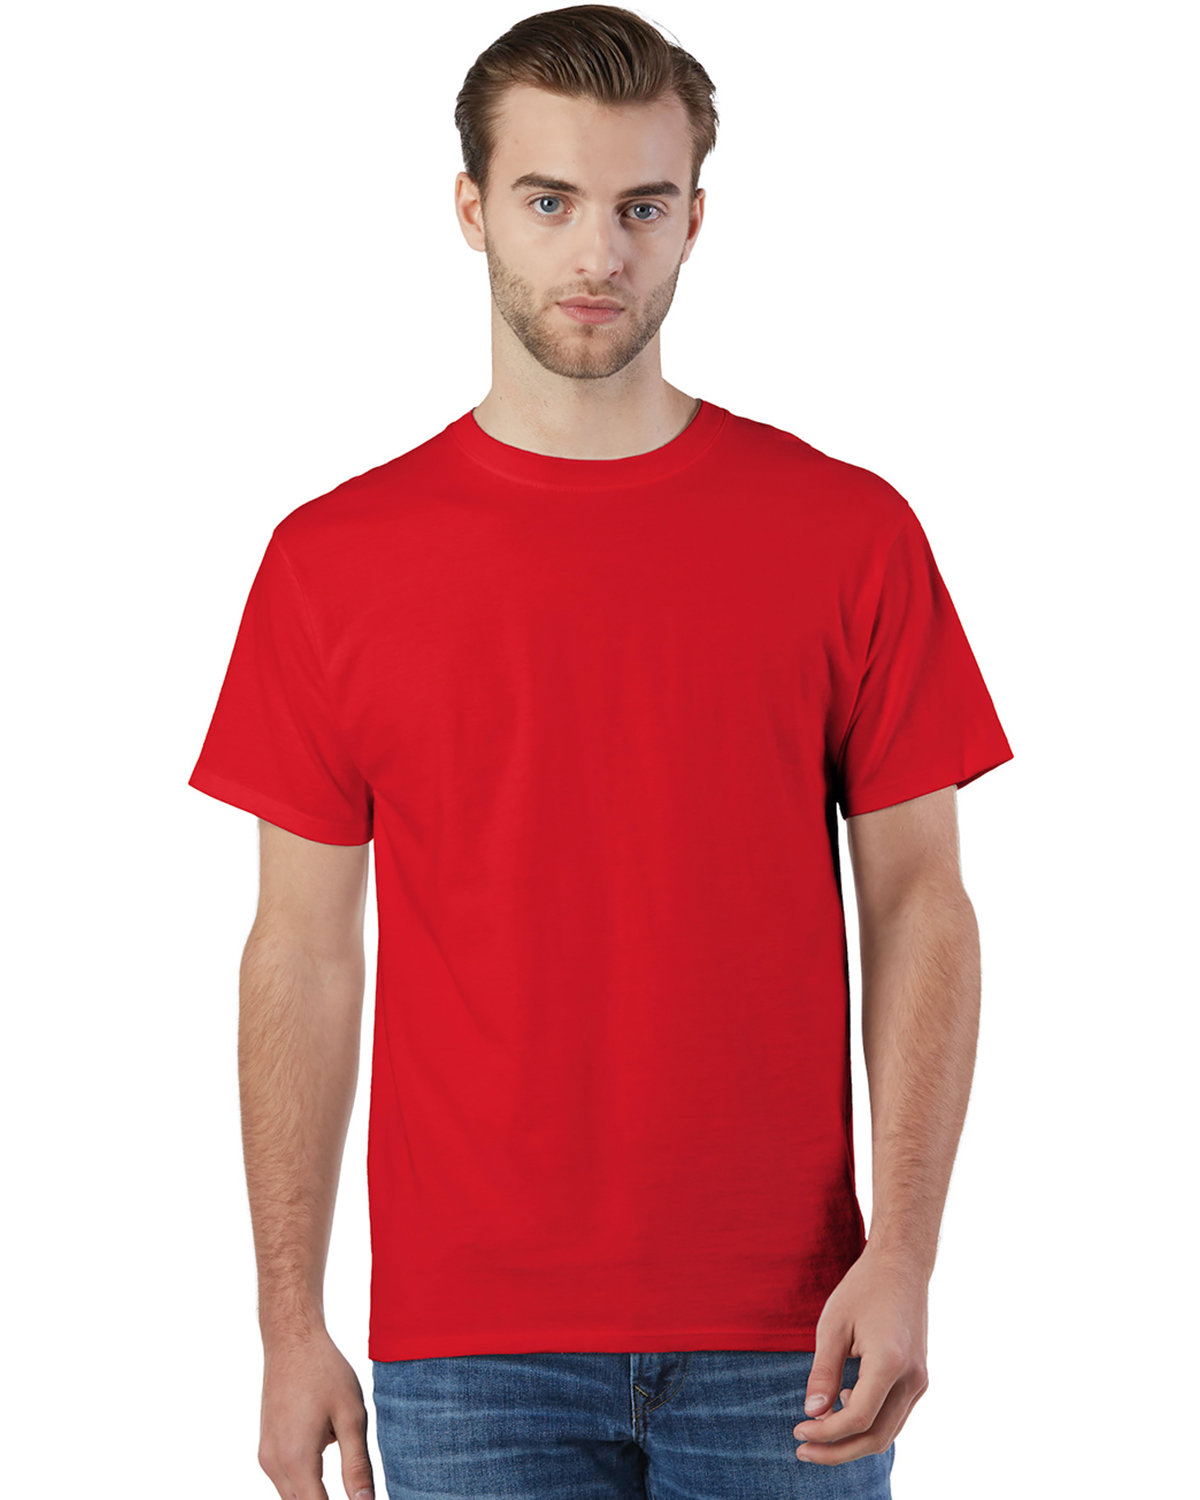 Champion Adult Ringspun Cotton T-Shirt ATHLETIC RED 